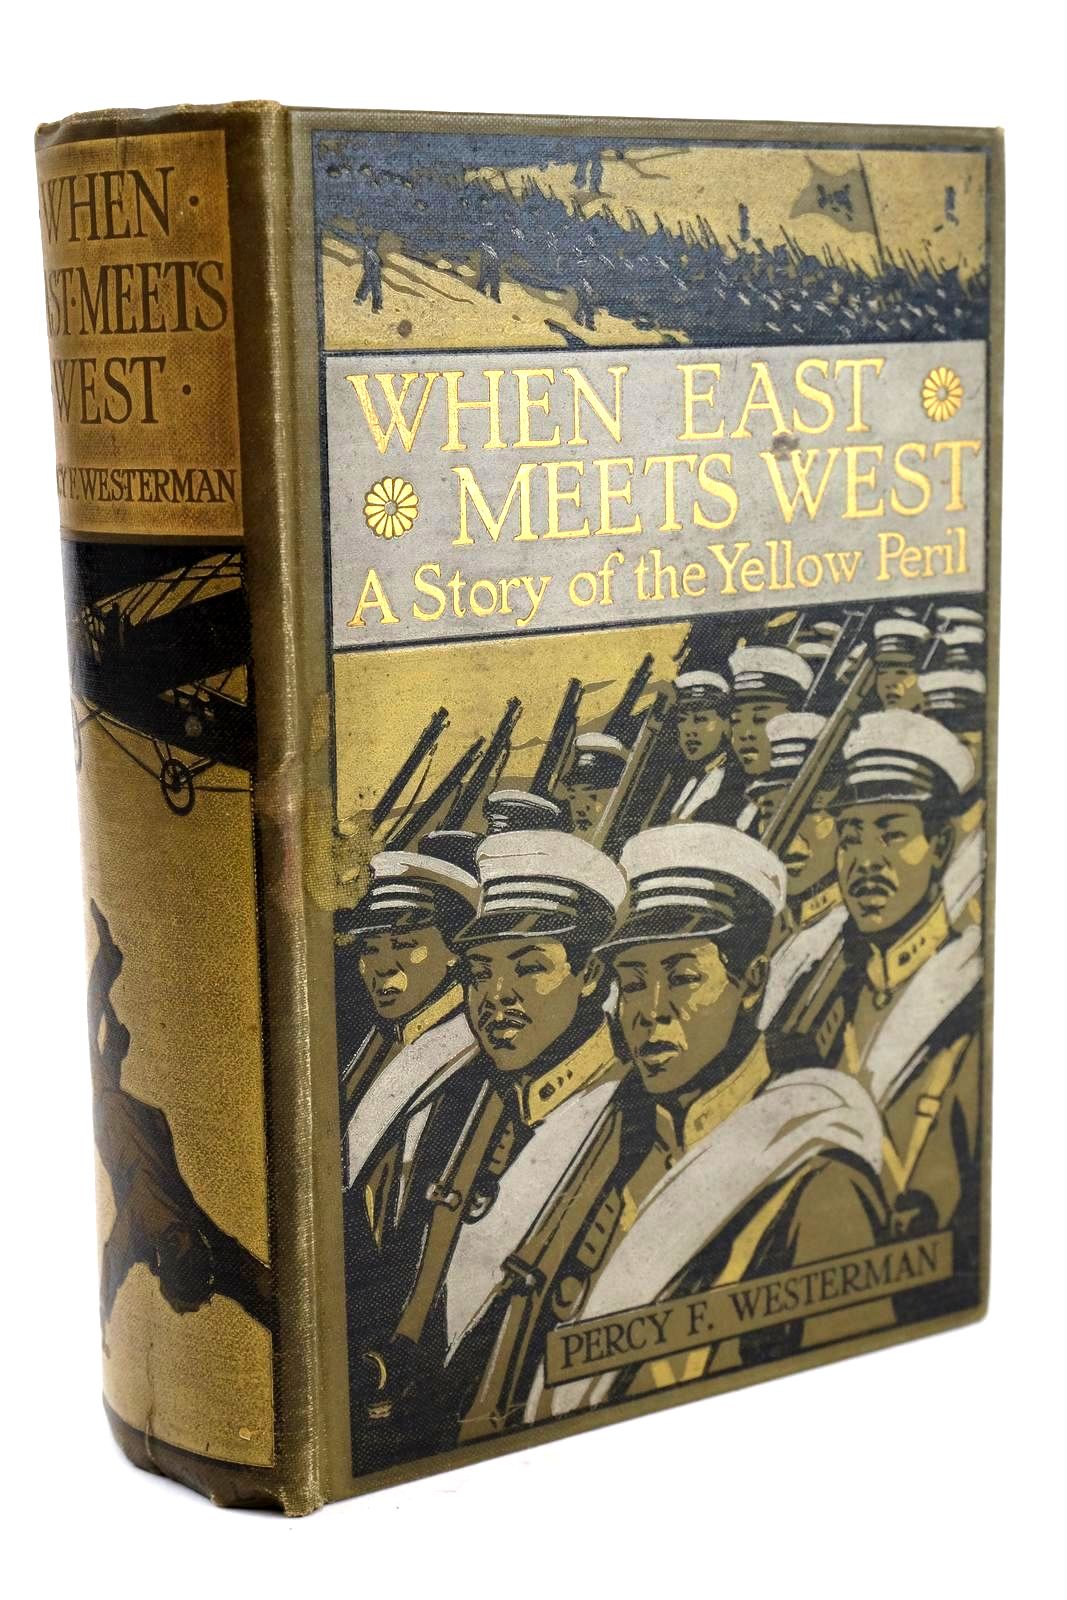 Photo of WHEN EAST MEETS WEST written by Westerman, Percy F. illustrated by Padday, C.M. published by Blackie &amp; Son Ltd. (STOCK CODE: 1324251)  for sale by Stella & Rose's Books